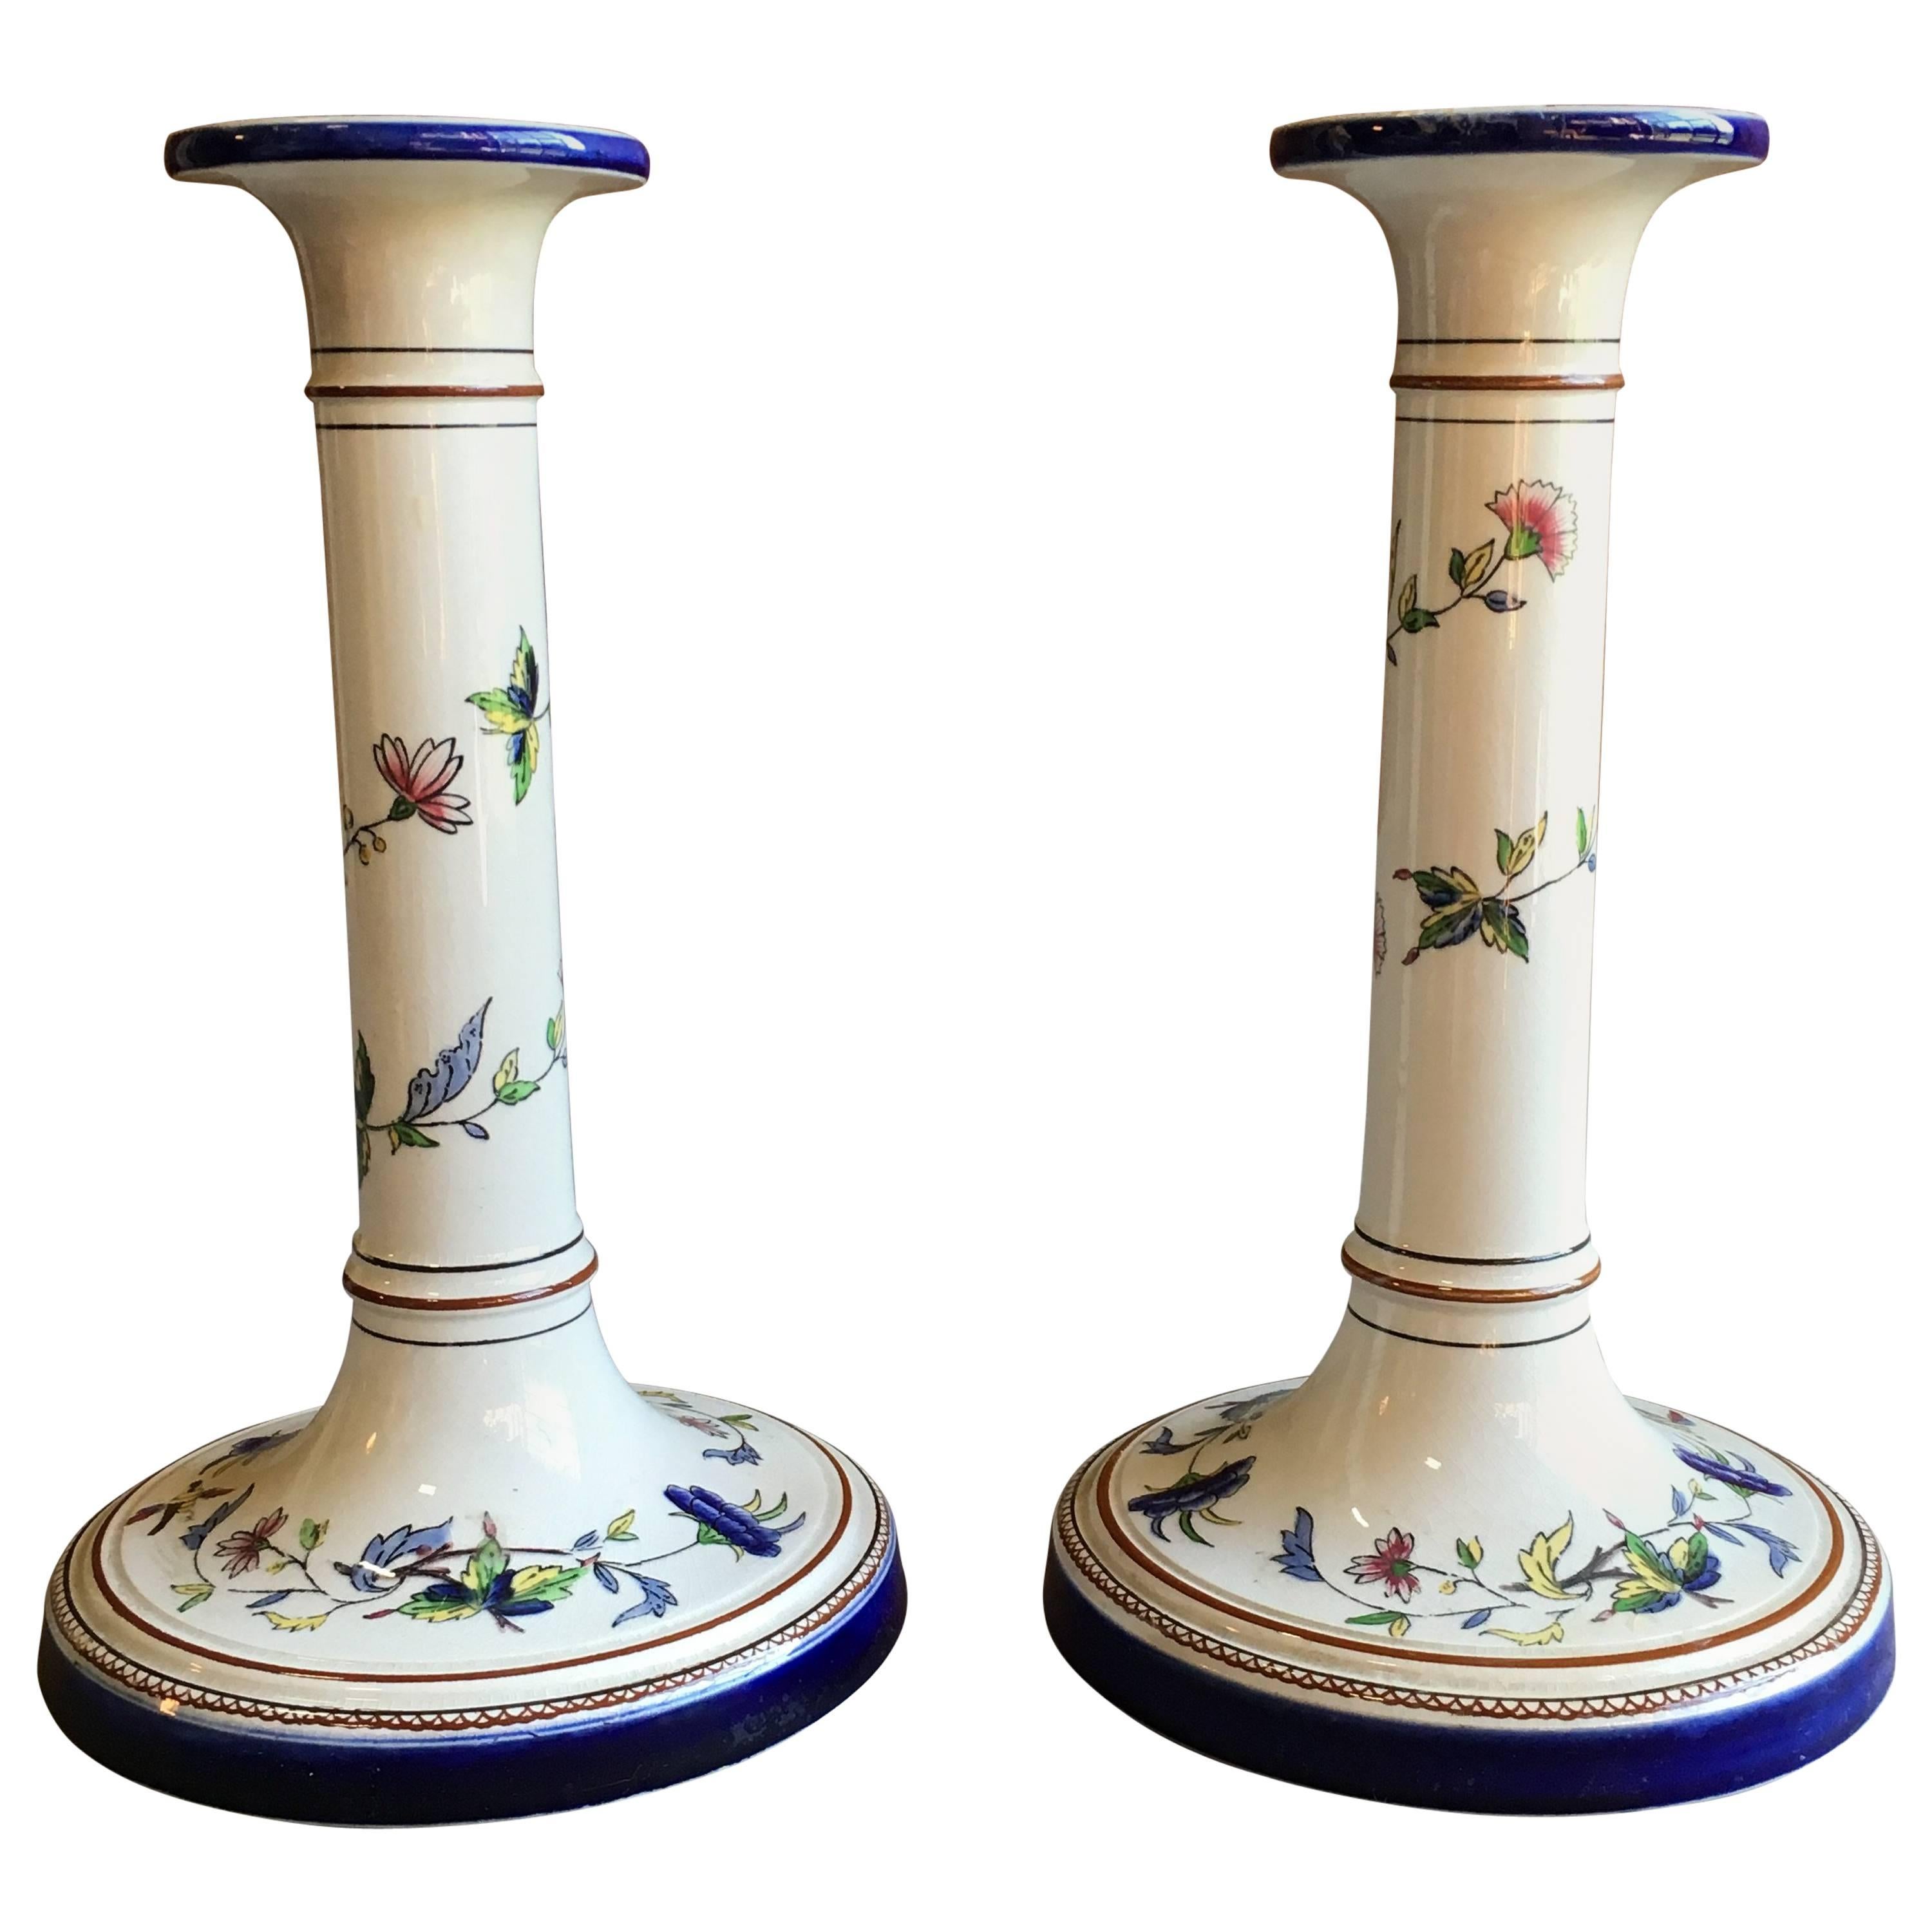 Pair of Faience Candlesticks, Rouen France